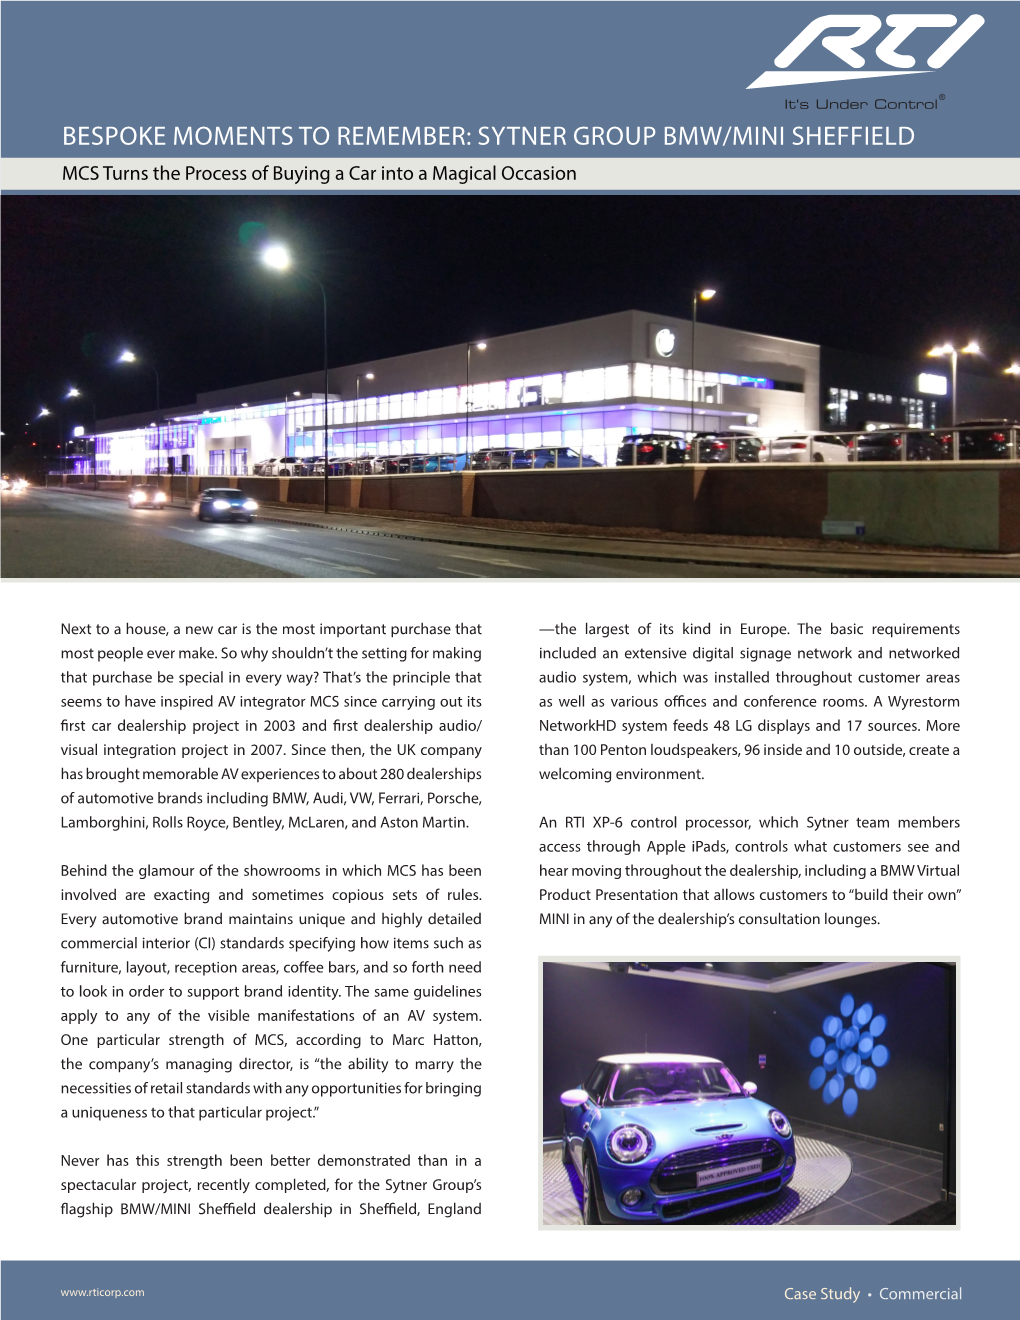 SYTNER GROUP BMW/MINI SHEFFIELD MCS Turns the Process of Buying a Car Into a Magical Occasion